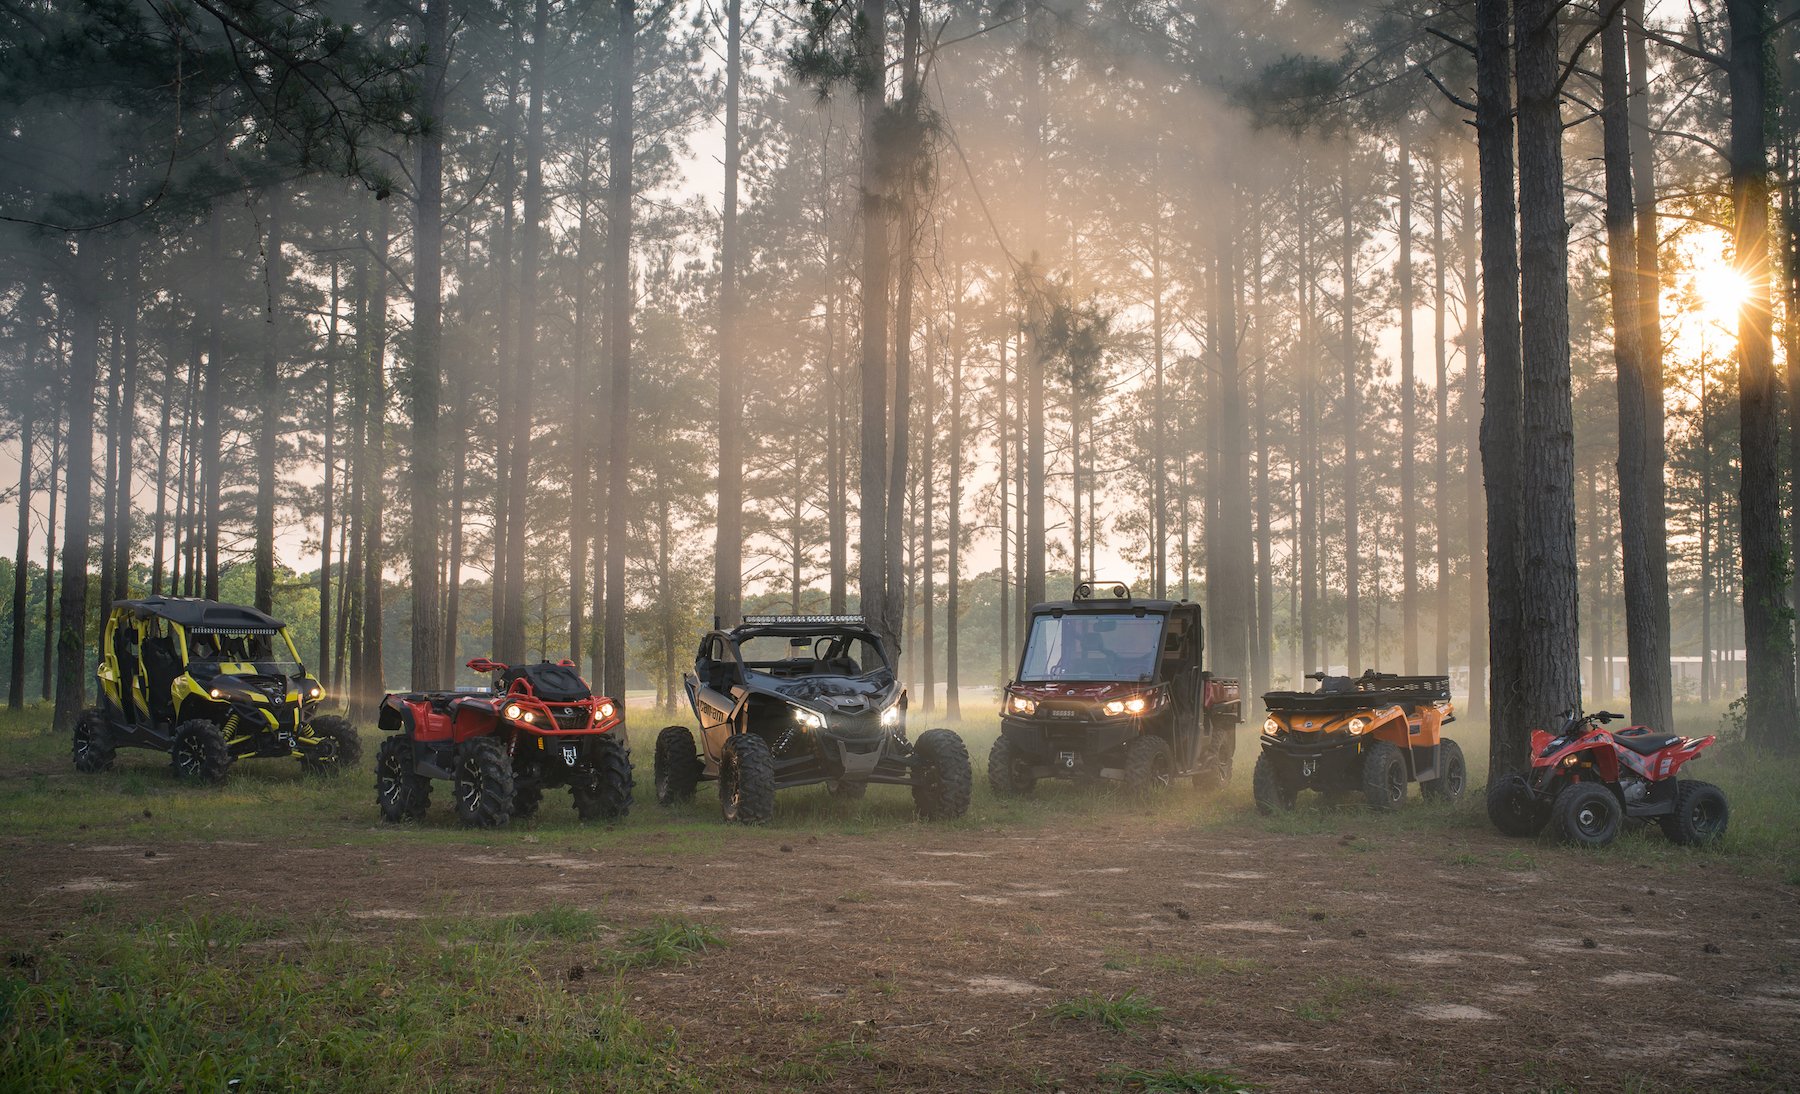 More information about "2018 CAN-AM OFF-ROAD LINEUP ADDS POWER AND DIVERSITY"